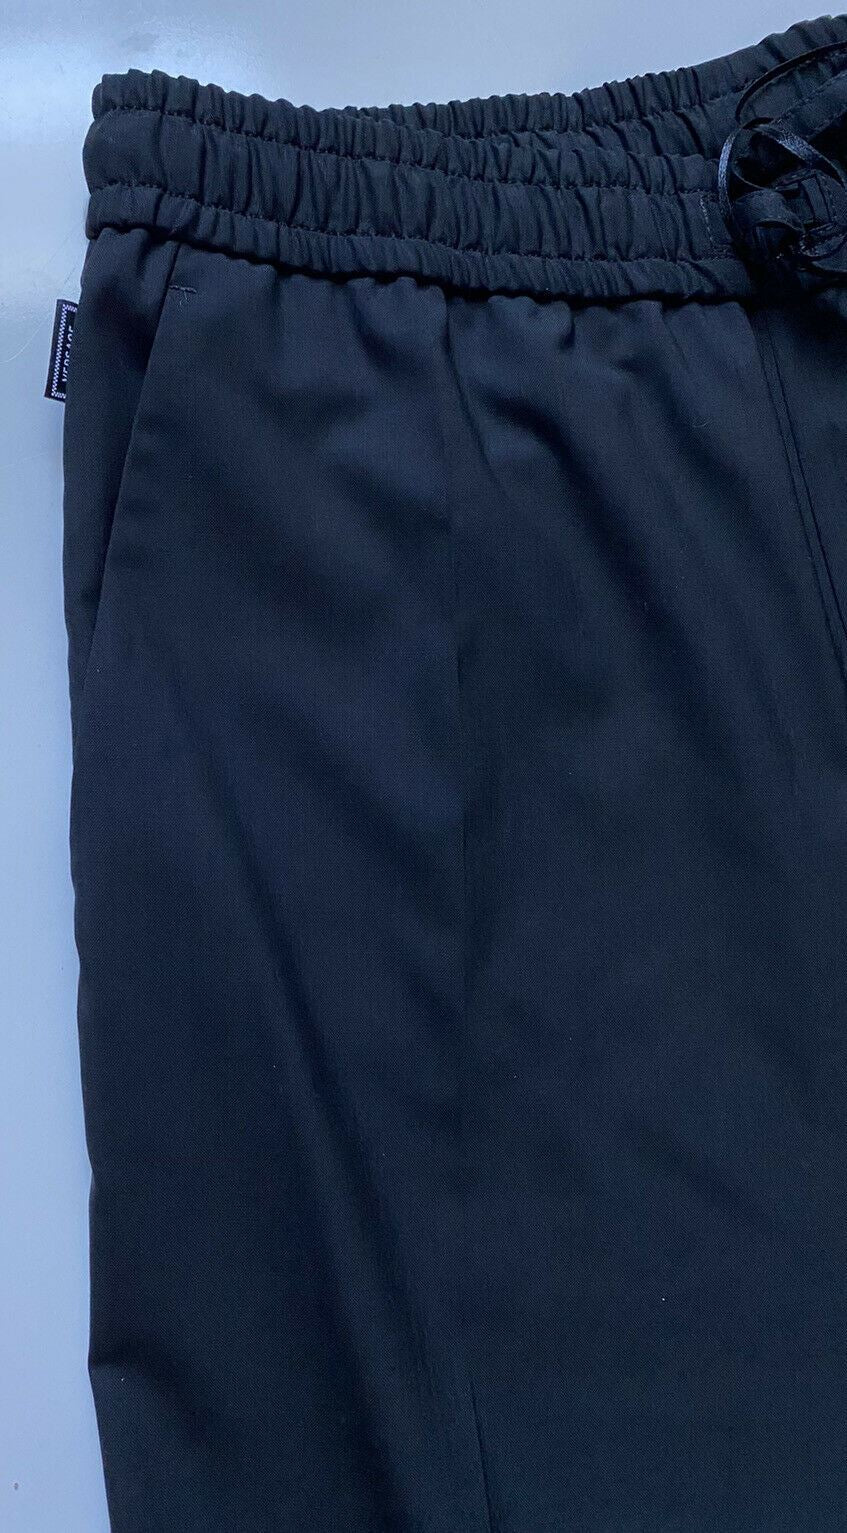 NWT $595 Versace Mens Black Wool Pants Size 36 US (52 Euro) Made in Italy A83072